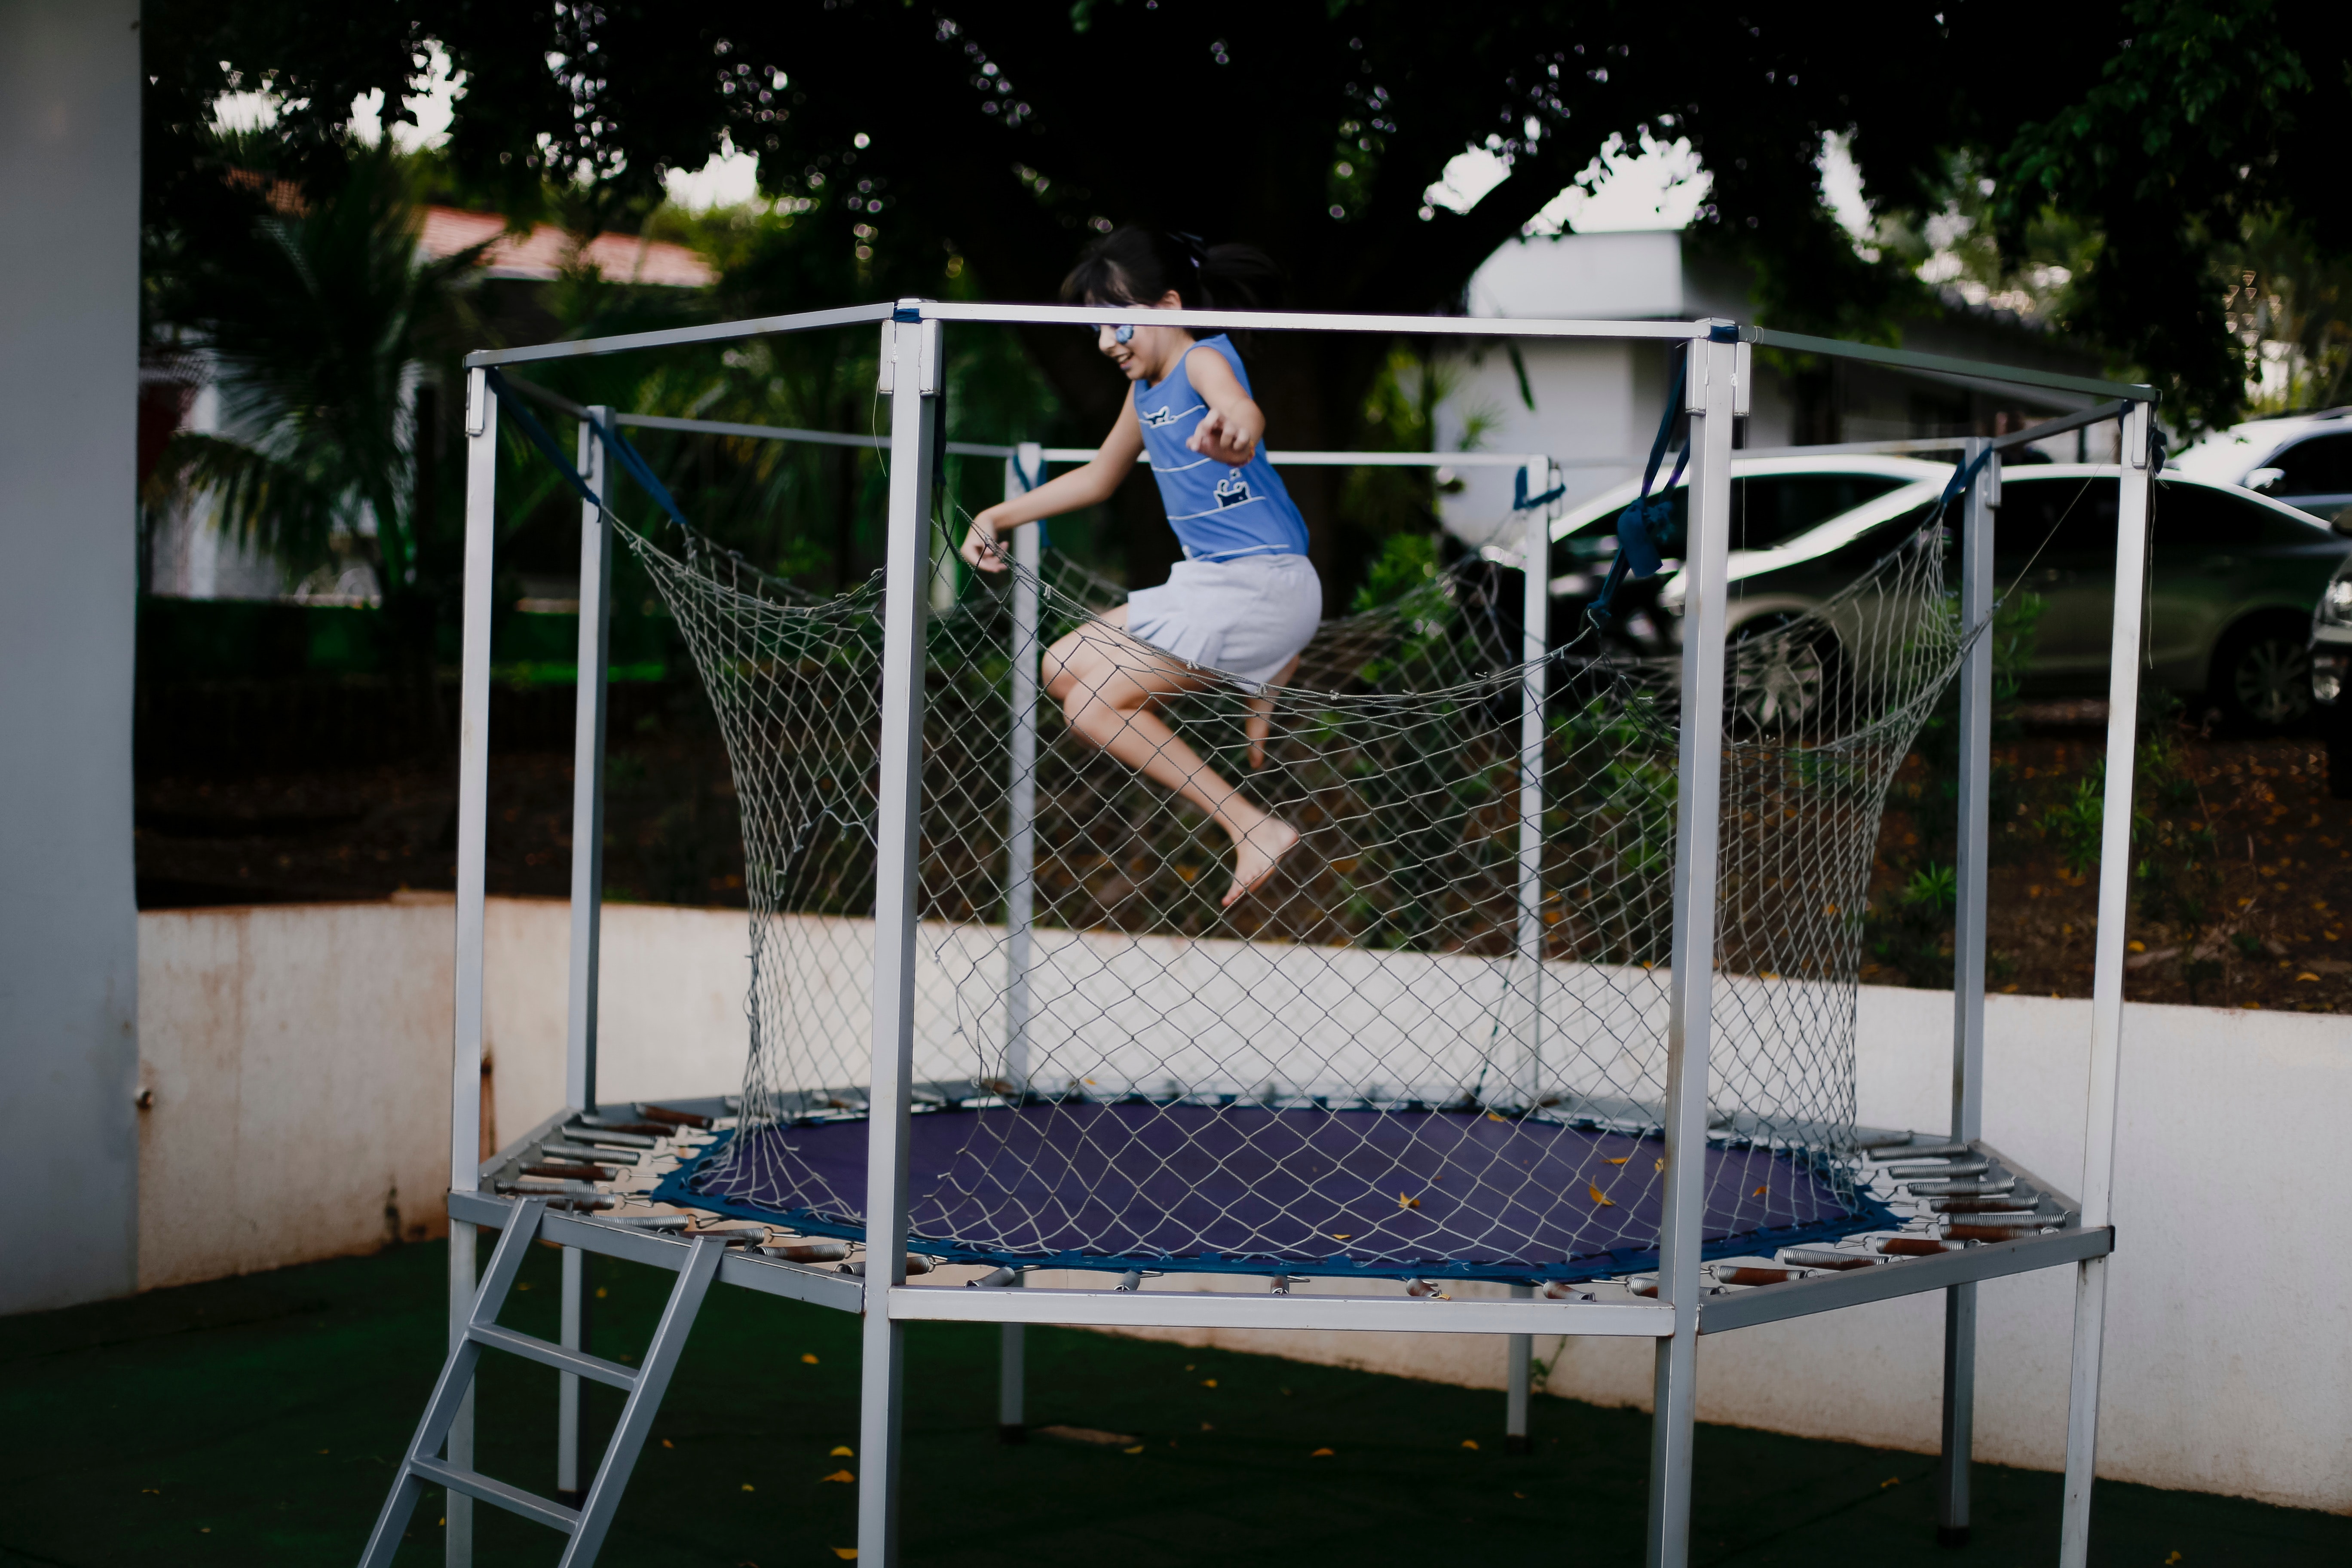 Case Study - Trampoline in an outdoor play area